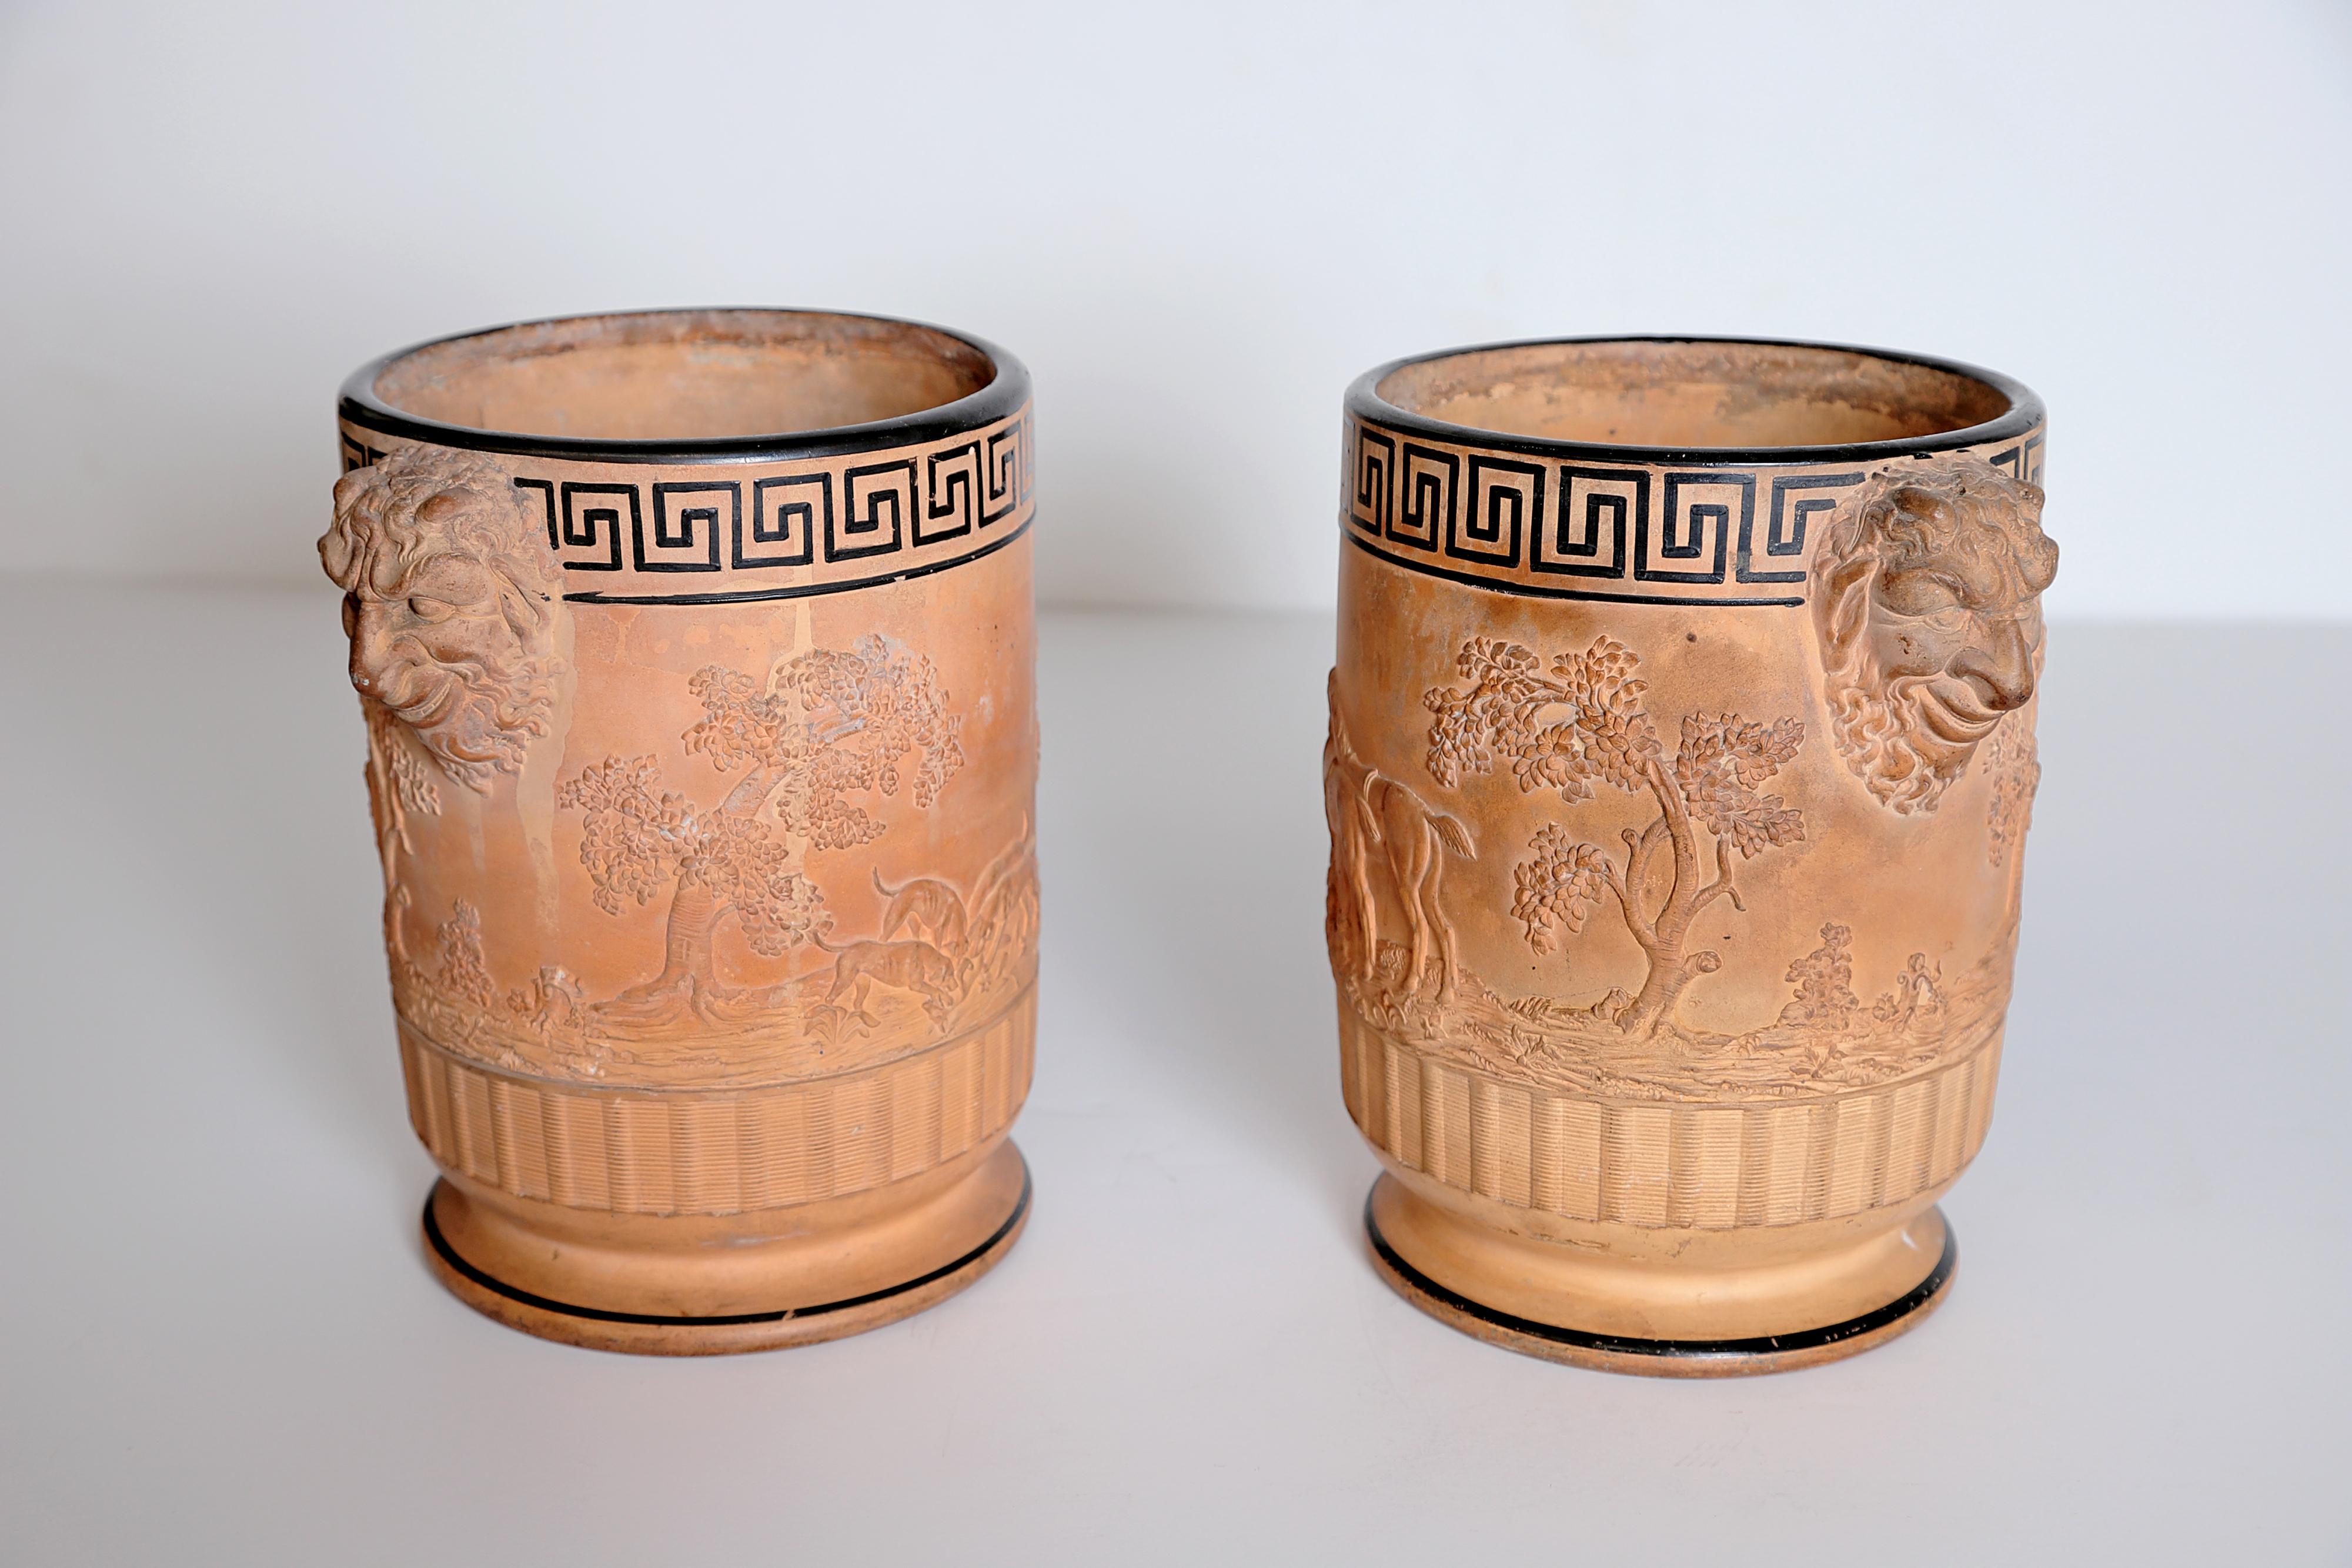 A near pair of Davenport terracotta wine coolers of barrel form with satyr handles, relief moulded with continuous hunting scenes, beneath brown enameled Greek key designs, the foot rims with engine turned bands, also enameled in in brown. Impressed